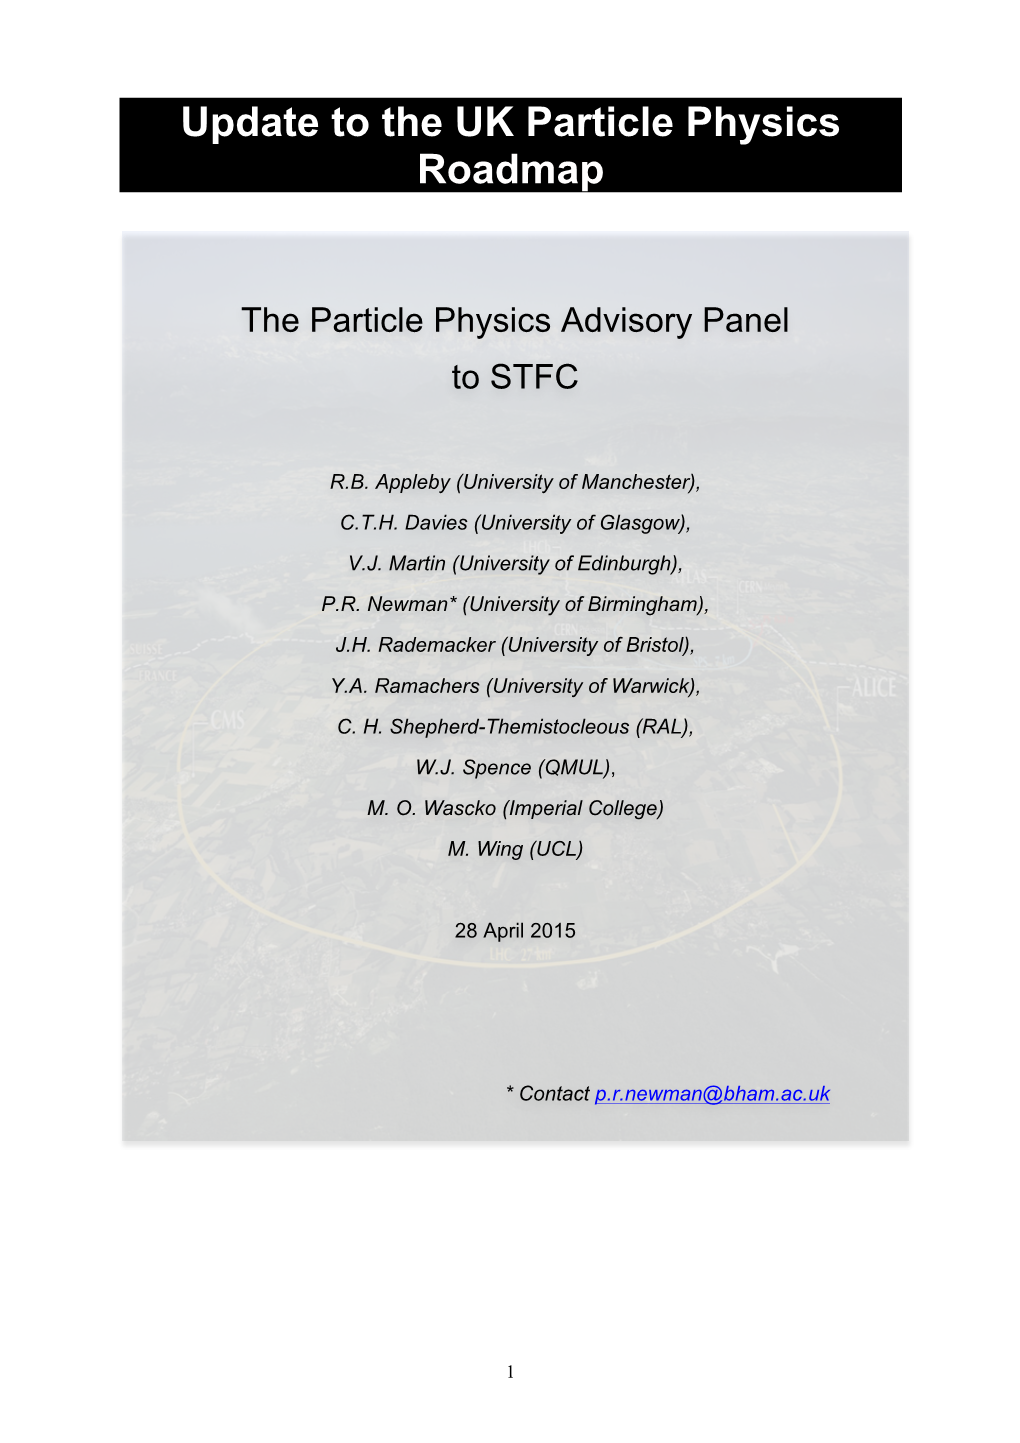 Update to the UK Particle Physics Roadmap